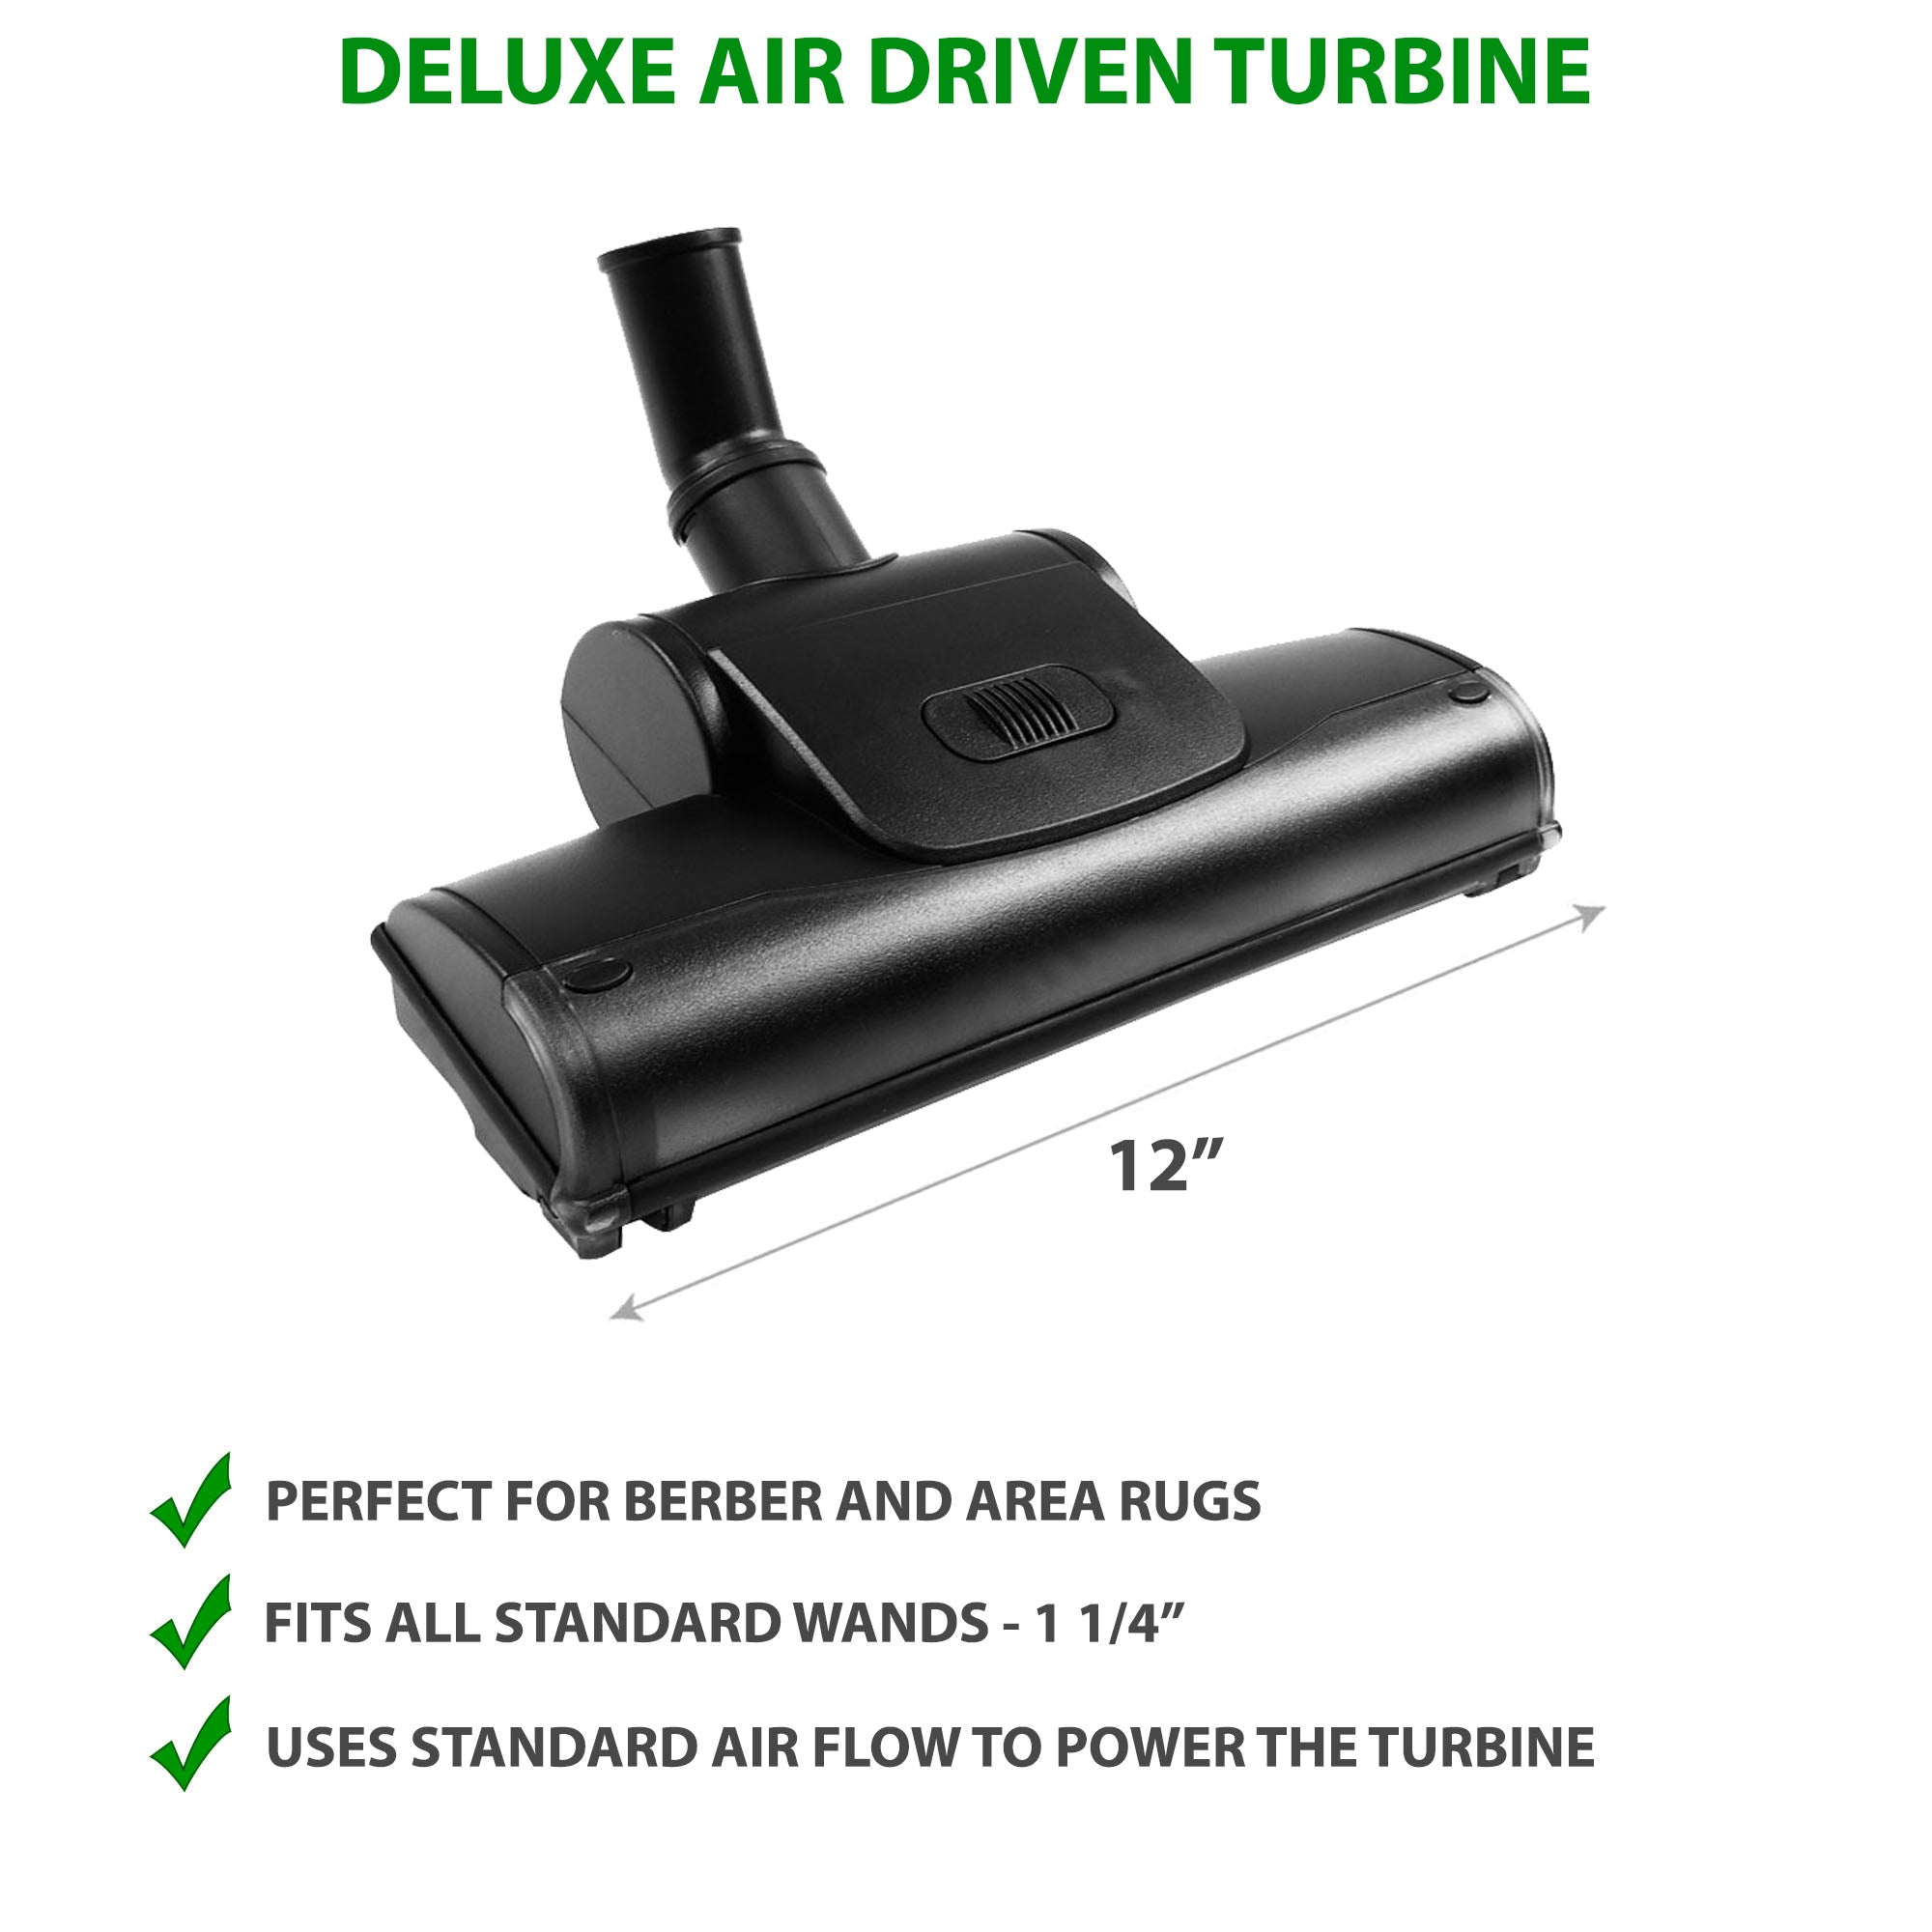 DrainVac G2-007i Infinity Central Vacuum | 700 Air Watts Motor | with Deluxe Air Package